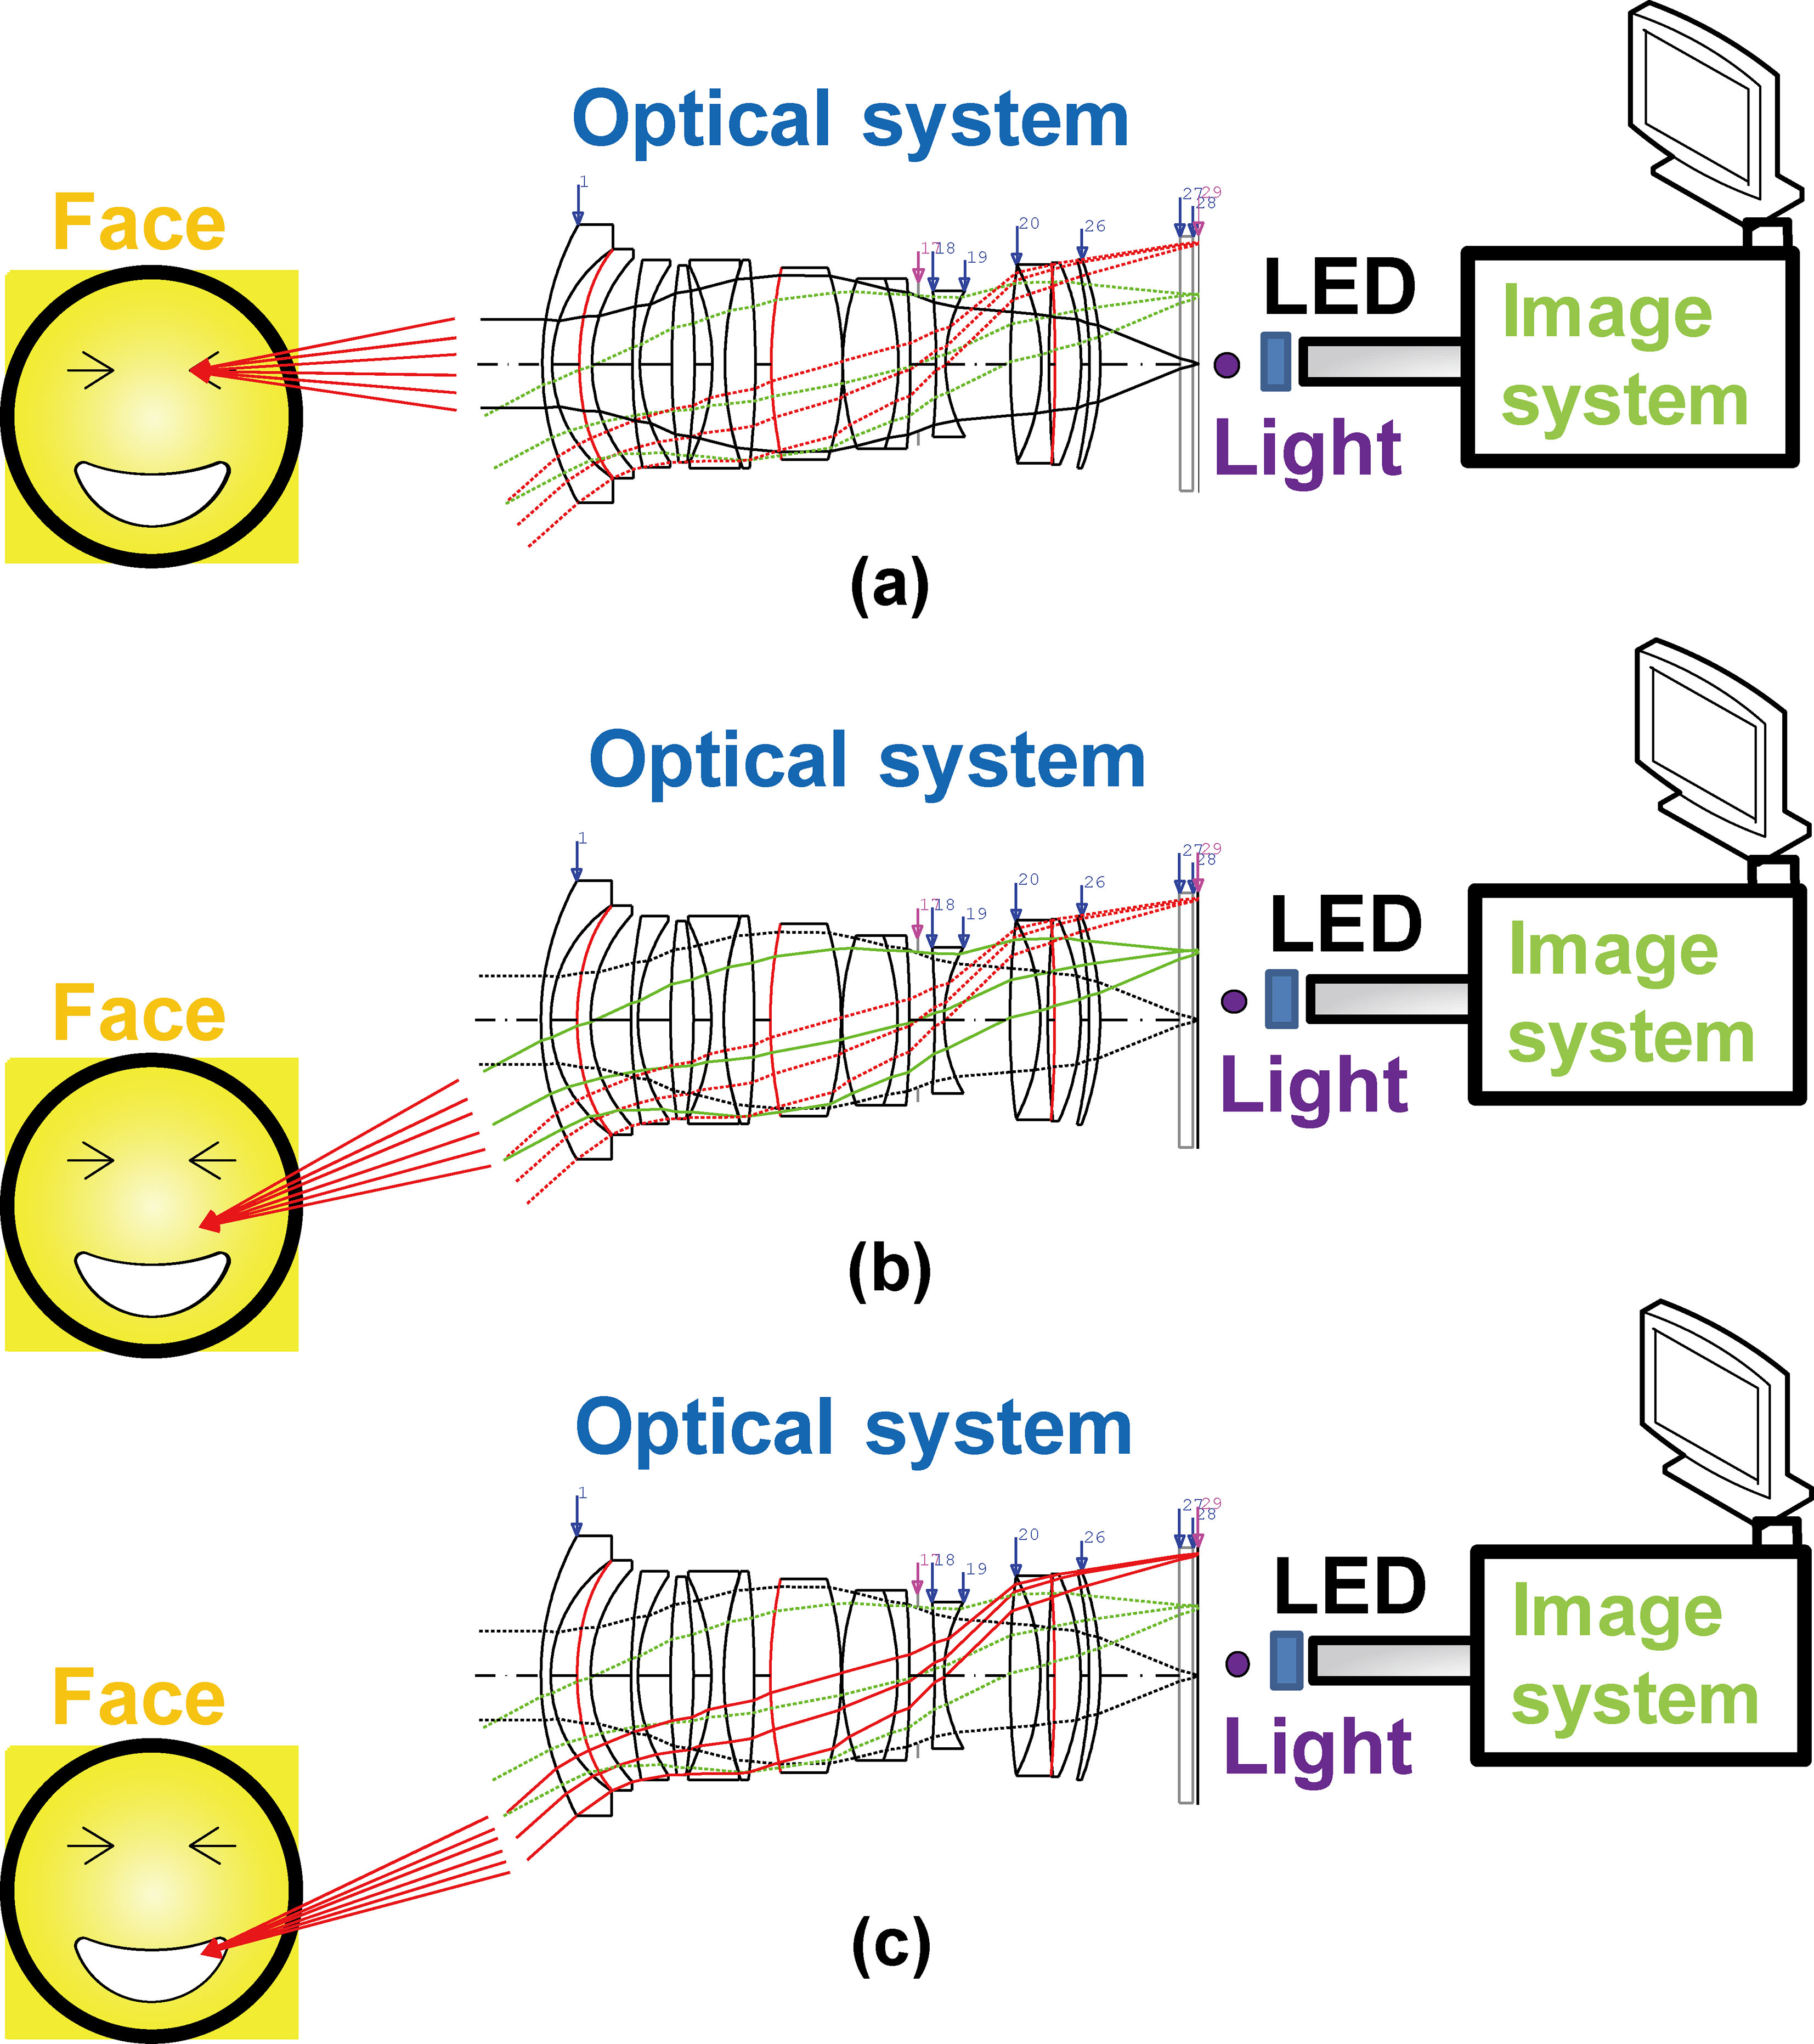 Conceptual block diagram of the designed ultrawide-angle optical system for ophthalmology and dermatology applications: (a) focused in the eye, (b) unfocused to cover a wide area, and (c) focused outside the eye.